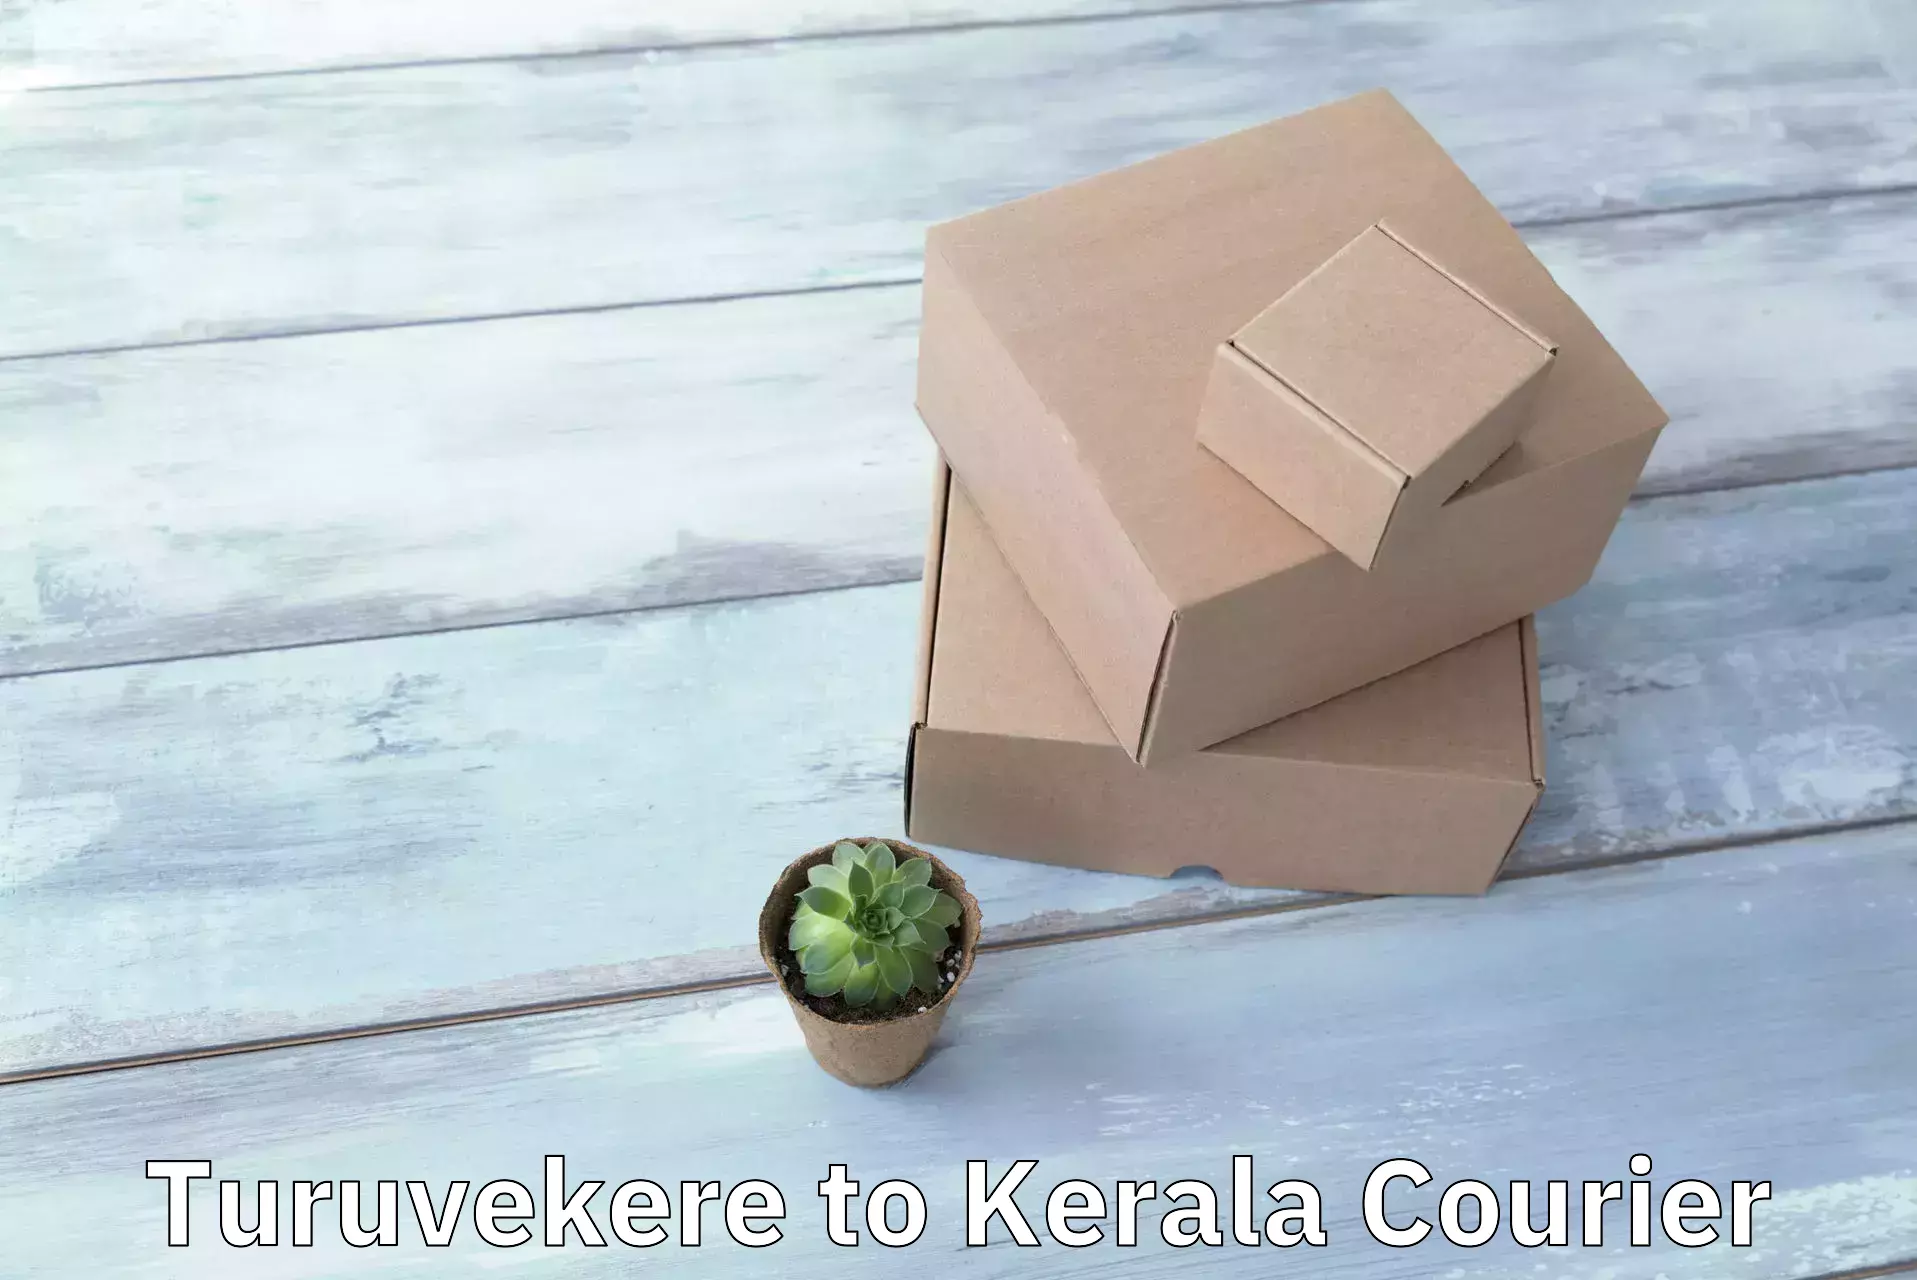 Package delivery network Turuvekere to Tiruvalla